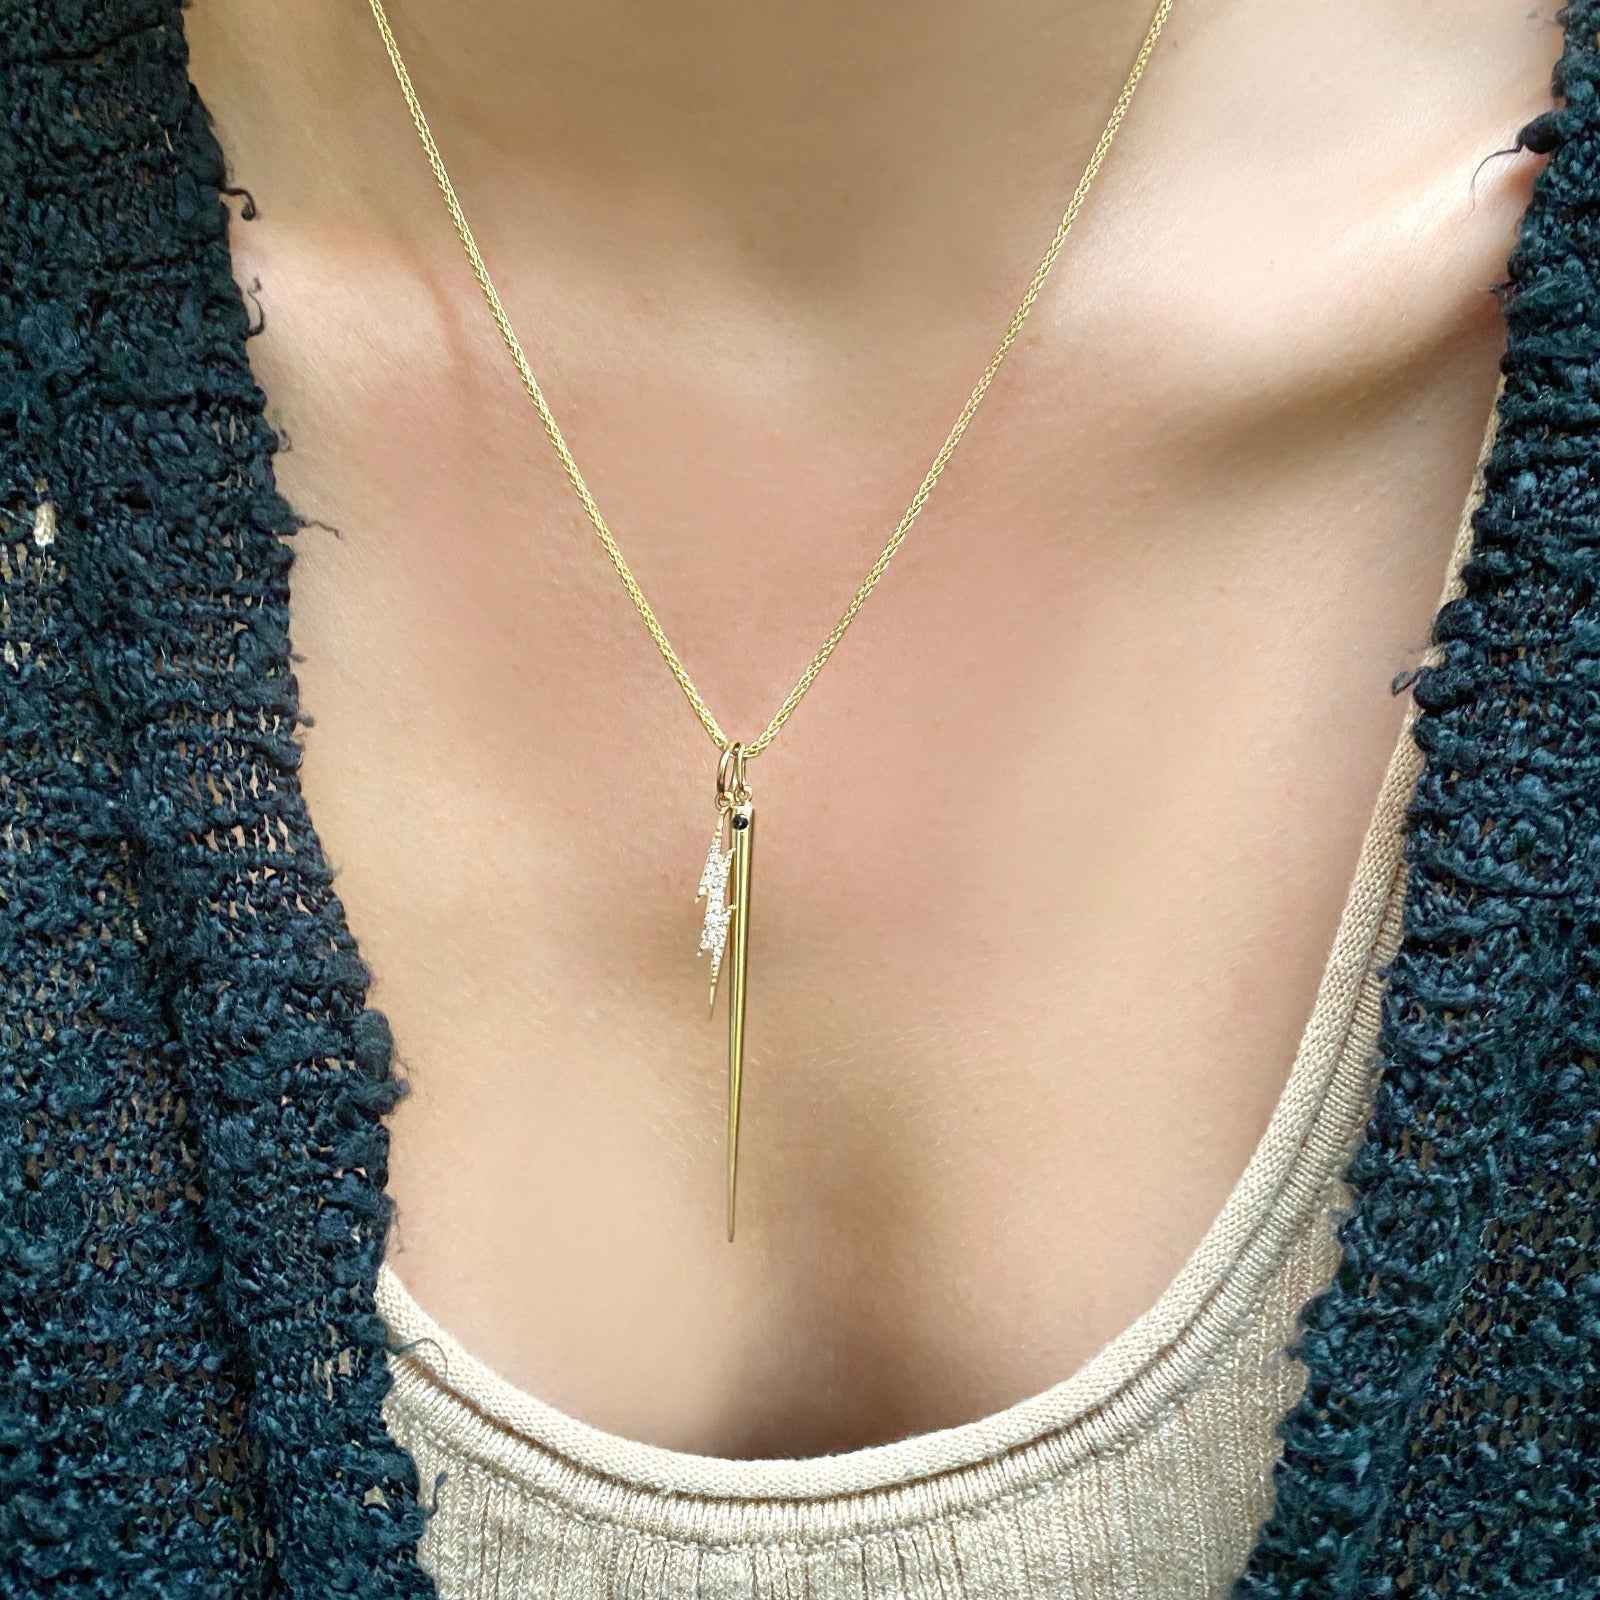 14k gold Wheat Chain Necklace. Styled on a neck with a quill spike charm